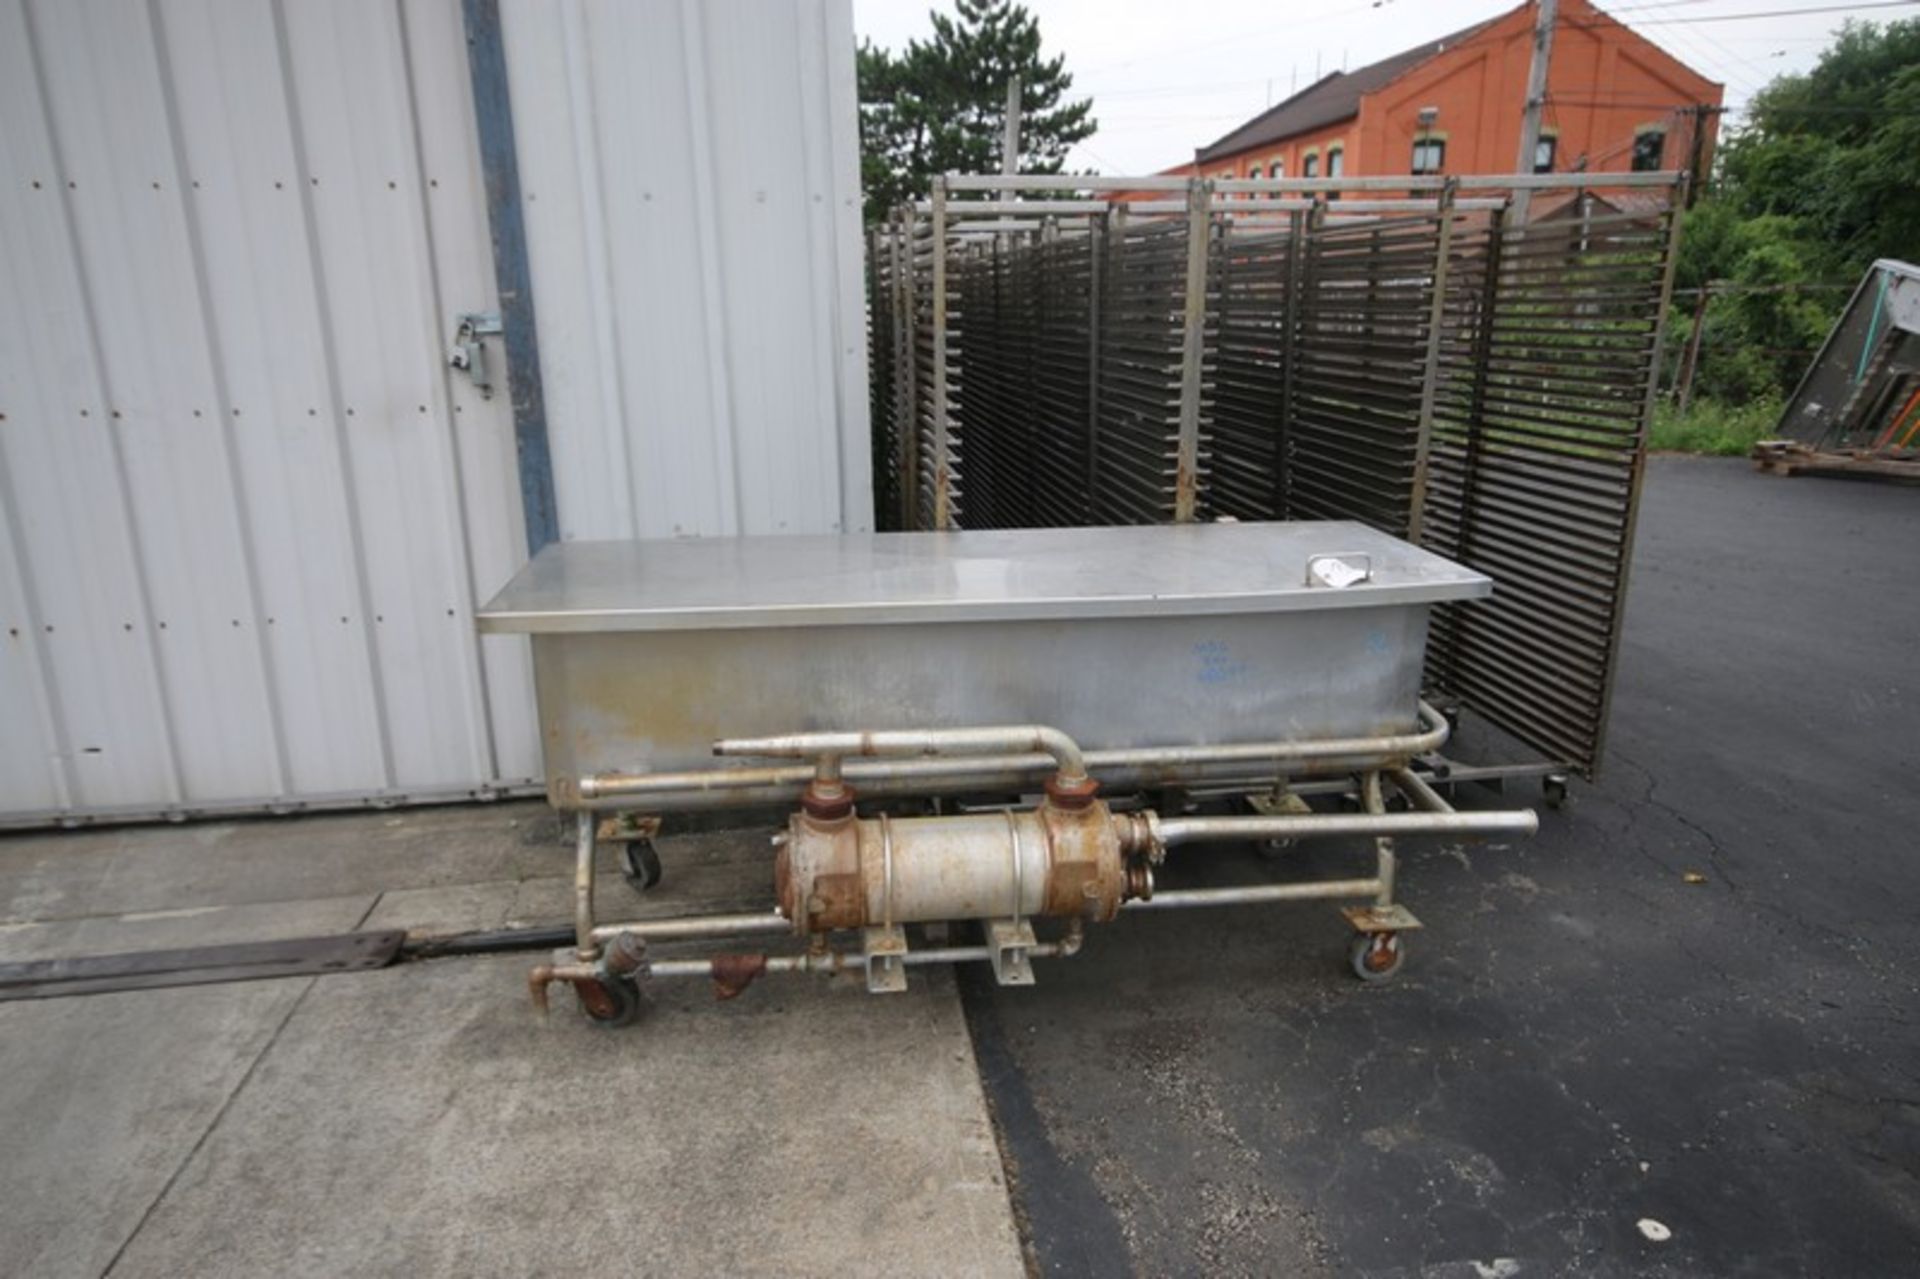 S/S Jet Spray COP Trough, with On Board Heat Exchanger, Overall Dims.: Aprox. 80" L x 38" W x 37" H